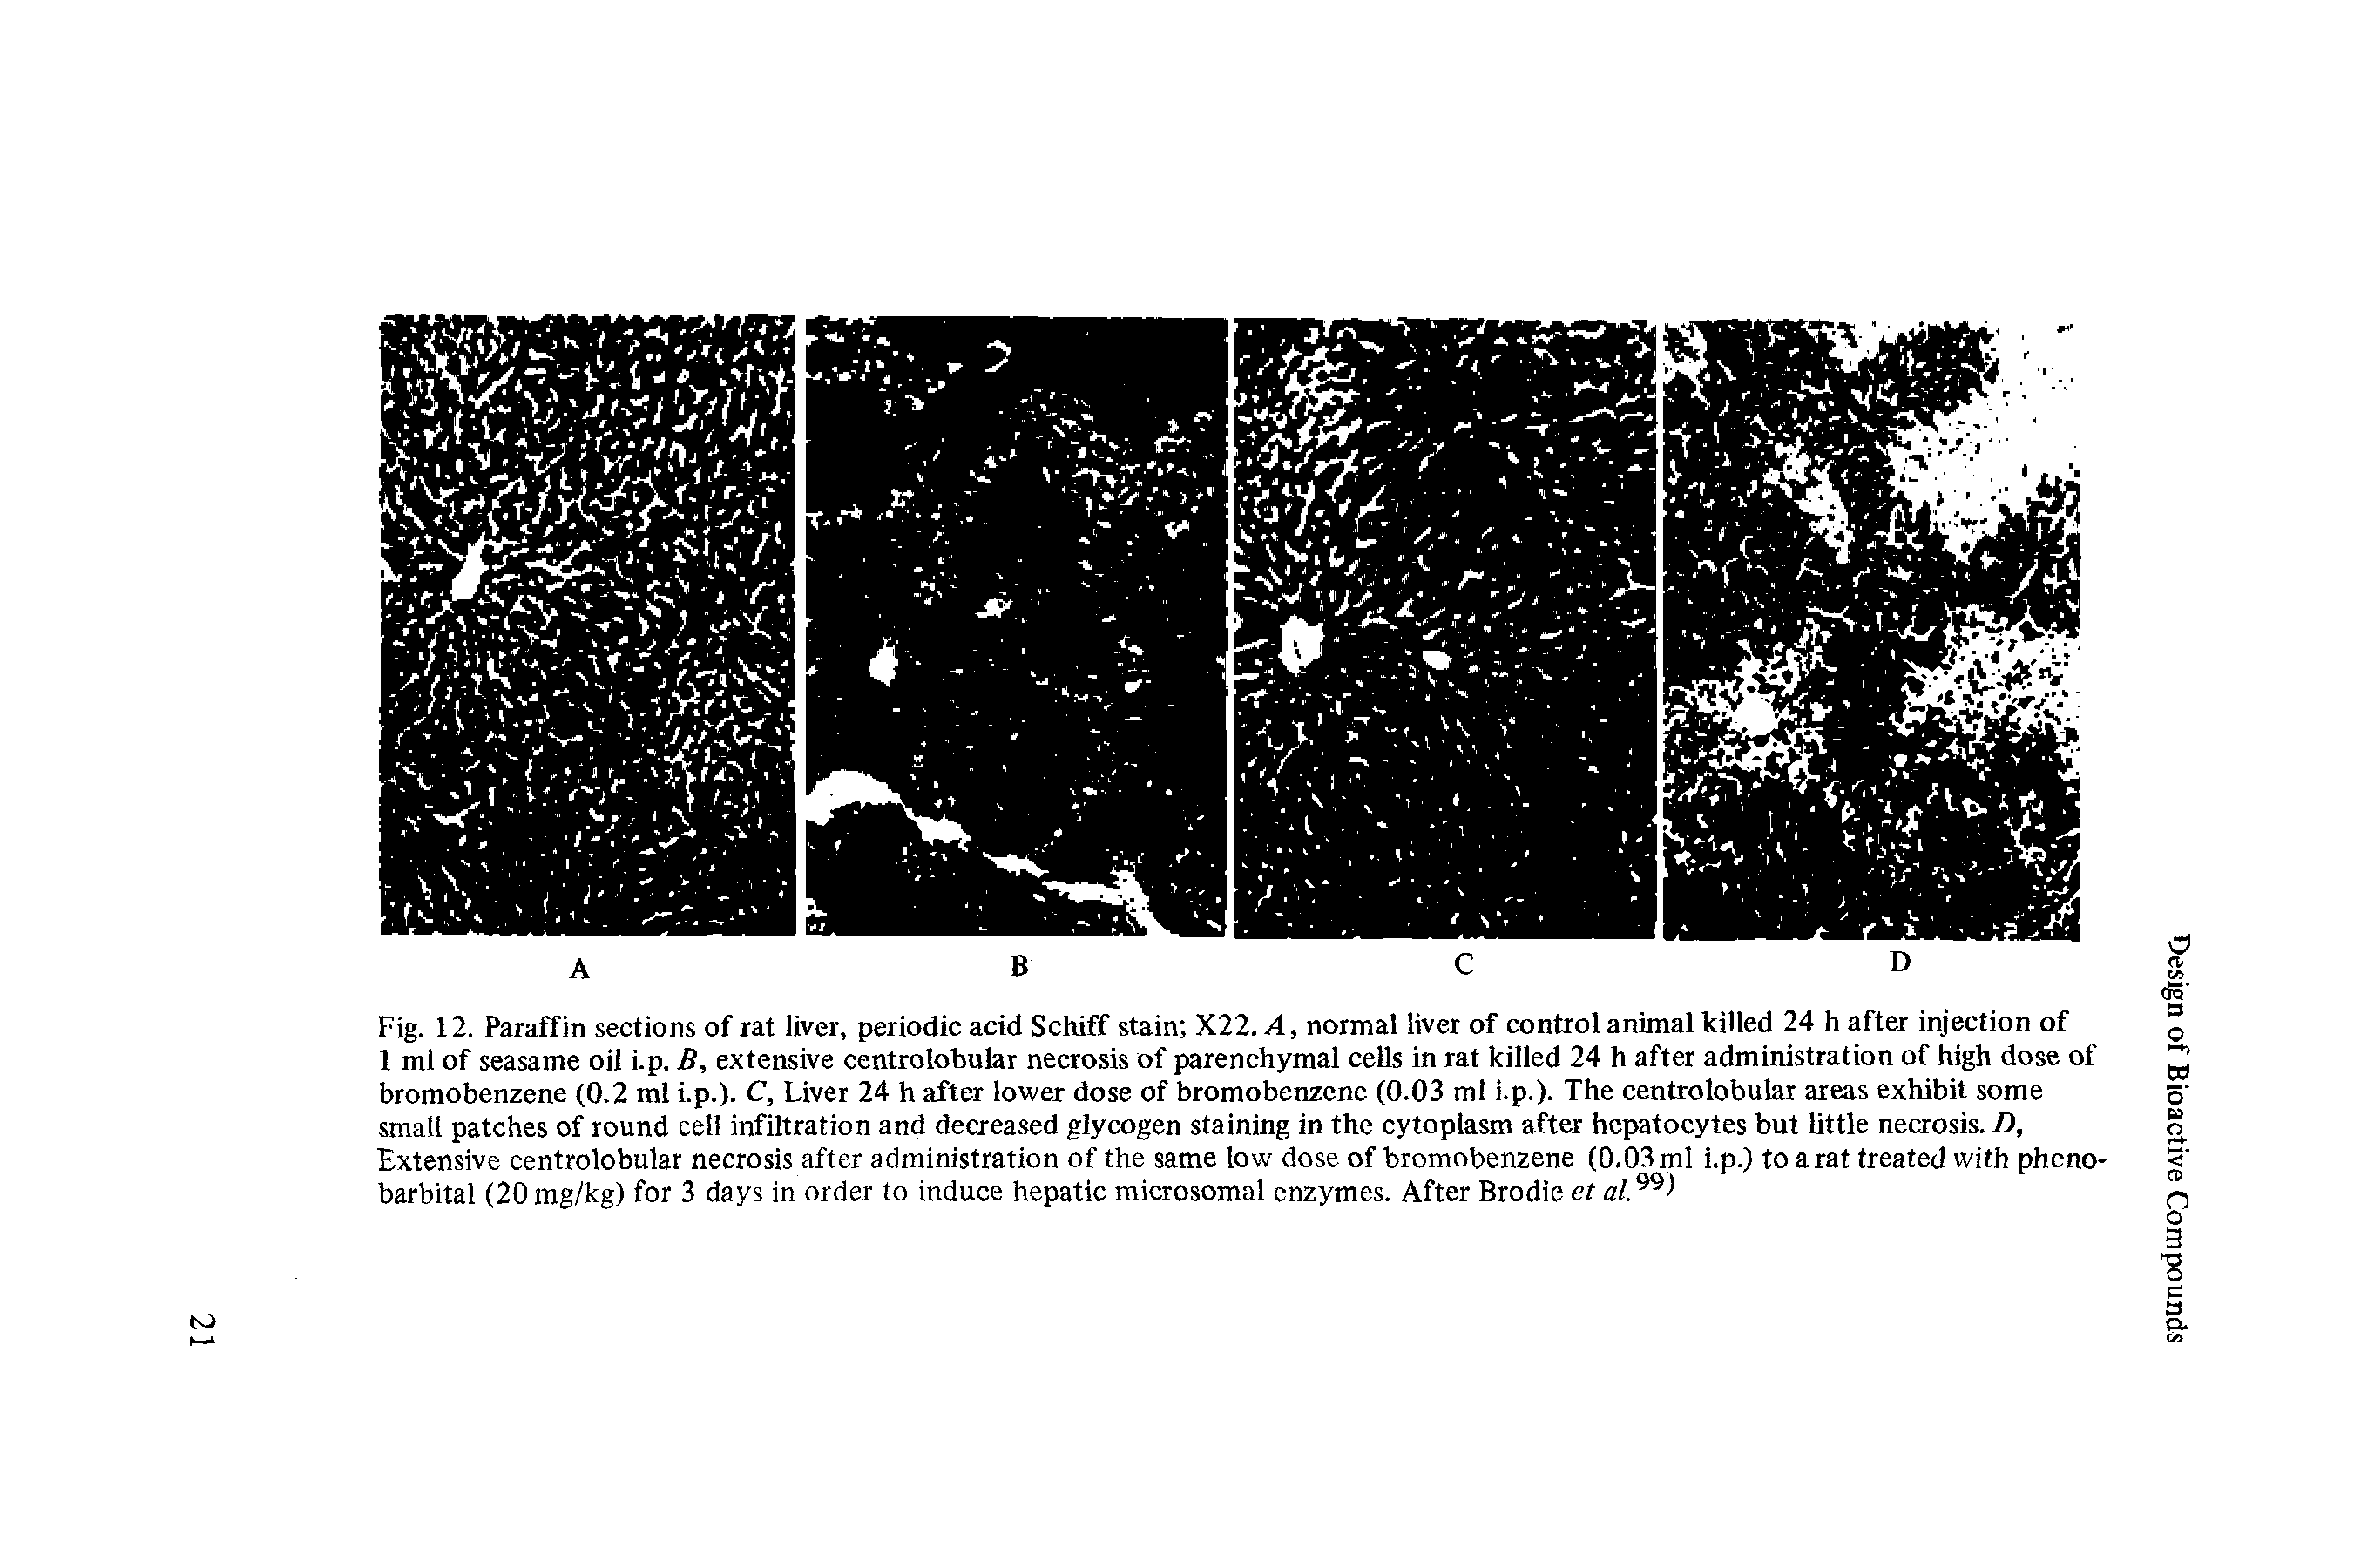 Fig. 12. Paraffin sections of rat liver, periodic acid Schiff stain X22. A, normal liver of control animal killed 24 h after injection of 1 ml of seasame oil i.p. B, extensive centrolobular necrosis of parenchymal cells in rat killed 24 h after administration of high dose of bromobenzene (0.2 ml i.p.). C, Liver 24 h after lower dose of bromobenzene (0.03 ml i.p.). The centrolobular areas exhibit some small patches of round cell infiltration and decreased glycogen staining in the cytoplasm after hepatocytes but little necrosis. D, Extensive centrolobular necrosis after administration of the same low dose of bromobenzene (0.03 ml i.p.) to a rat treated with pheno-barbital (20 mg/kg) for 3 days in order to induce hepatic microsomal enzymes. After Brodie et al...